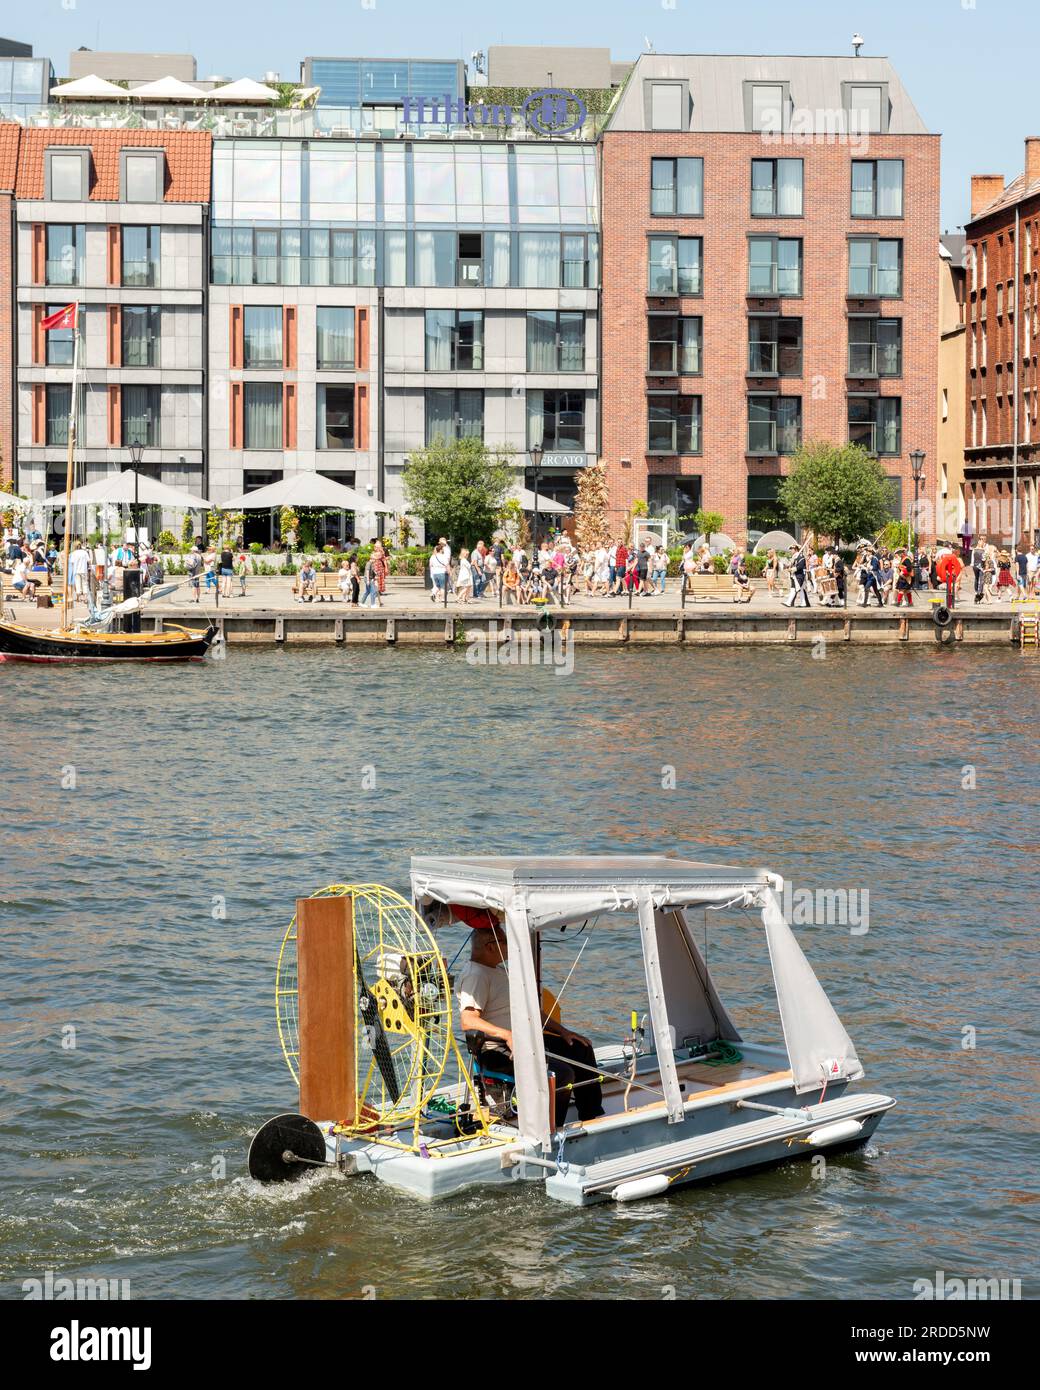 Funny DIY made up small vessel on Motlawa river in the Old Town of Gdansk, Poland Stock Photo